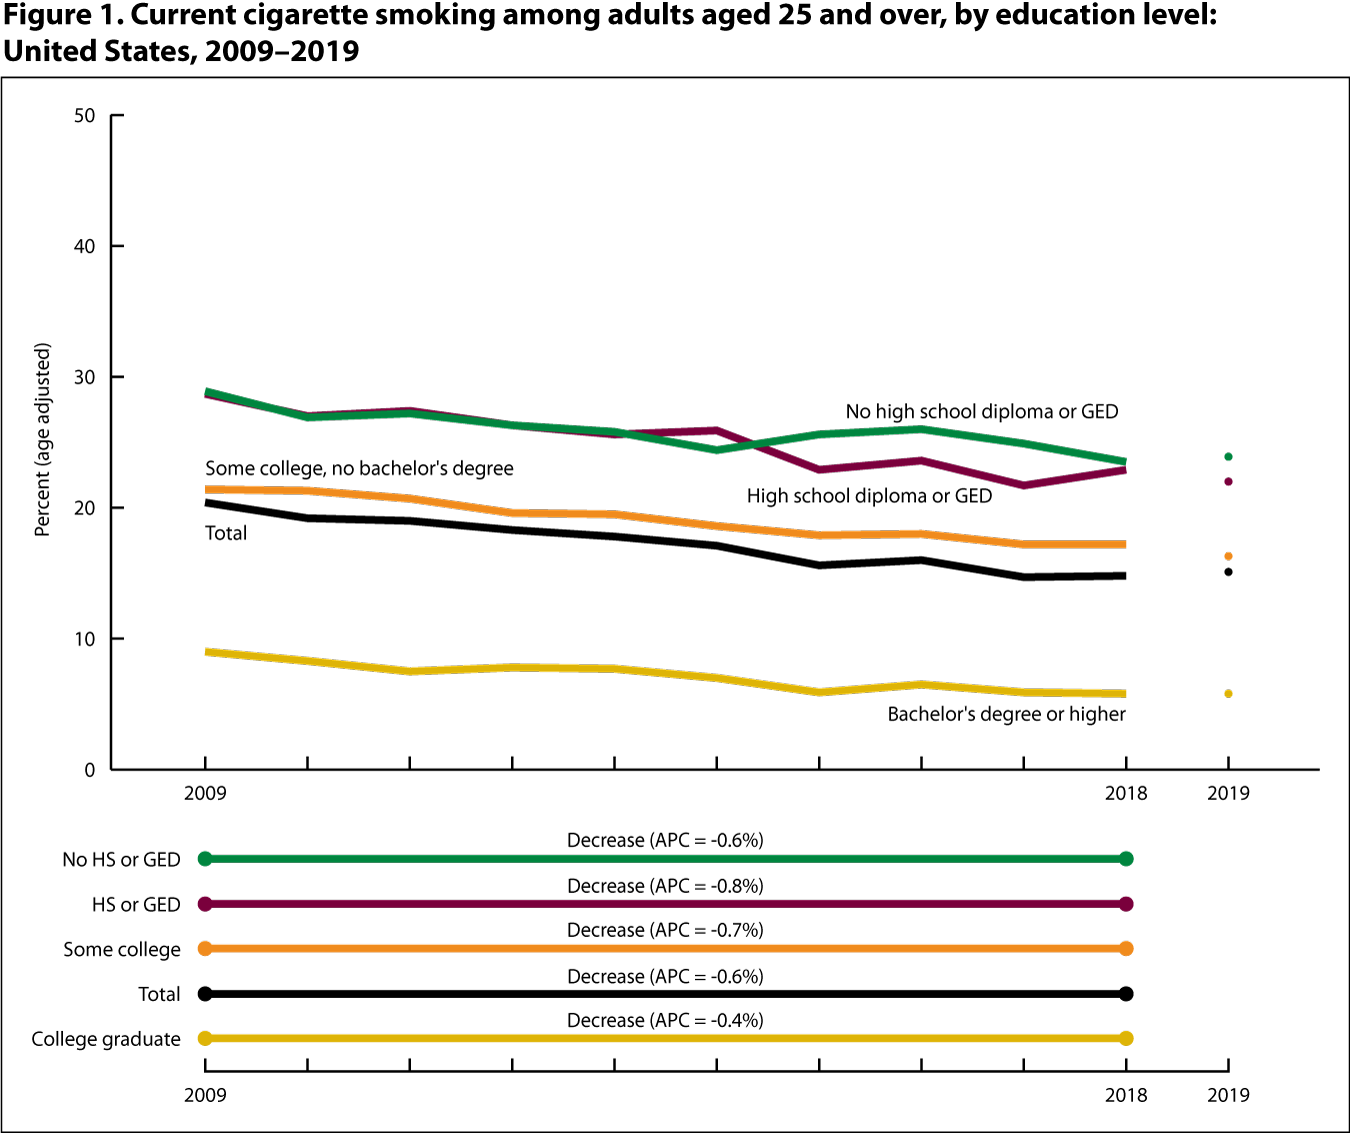 Figure 1 is a line graph showing the percentage of adults aged 25 and over who currently smoke cigarettes, by education level for 2009 through 2018 (line) and at 2019 (point).